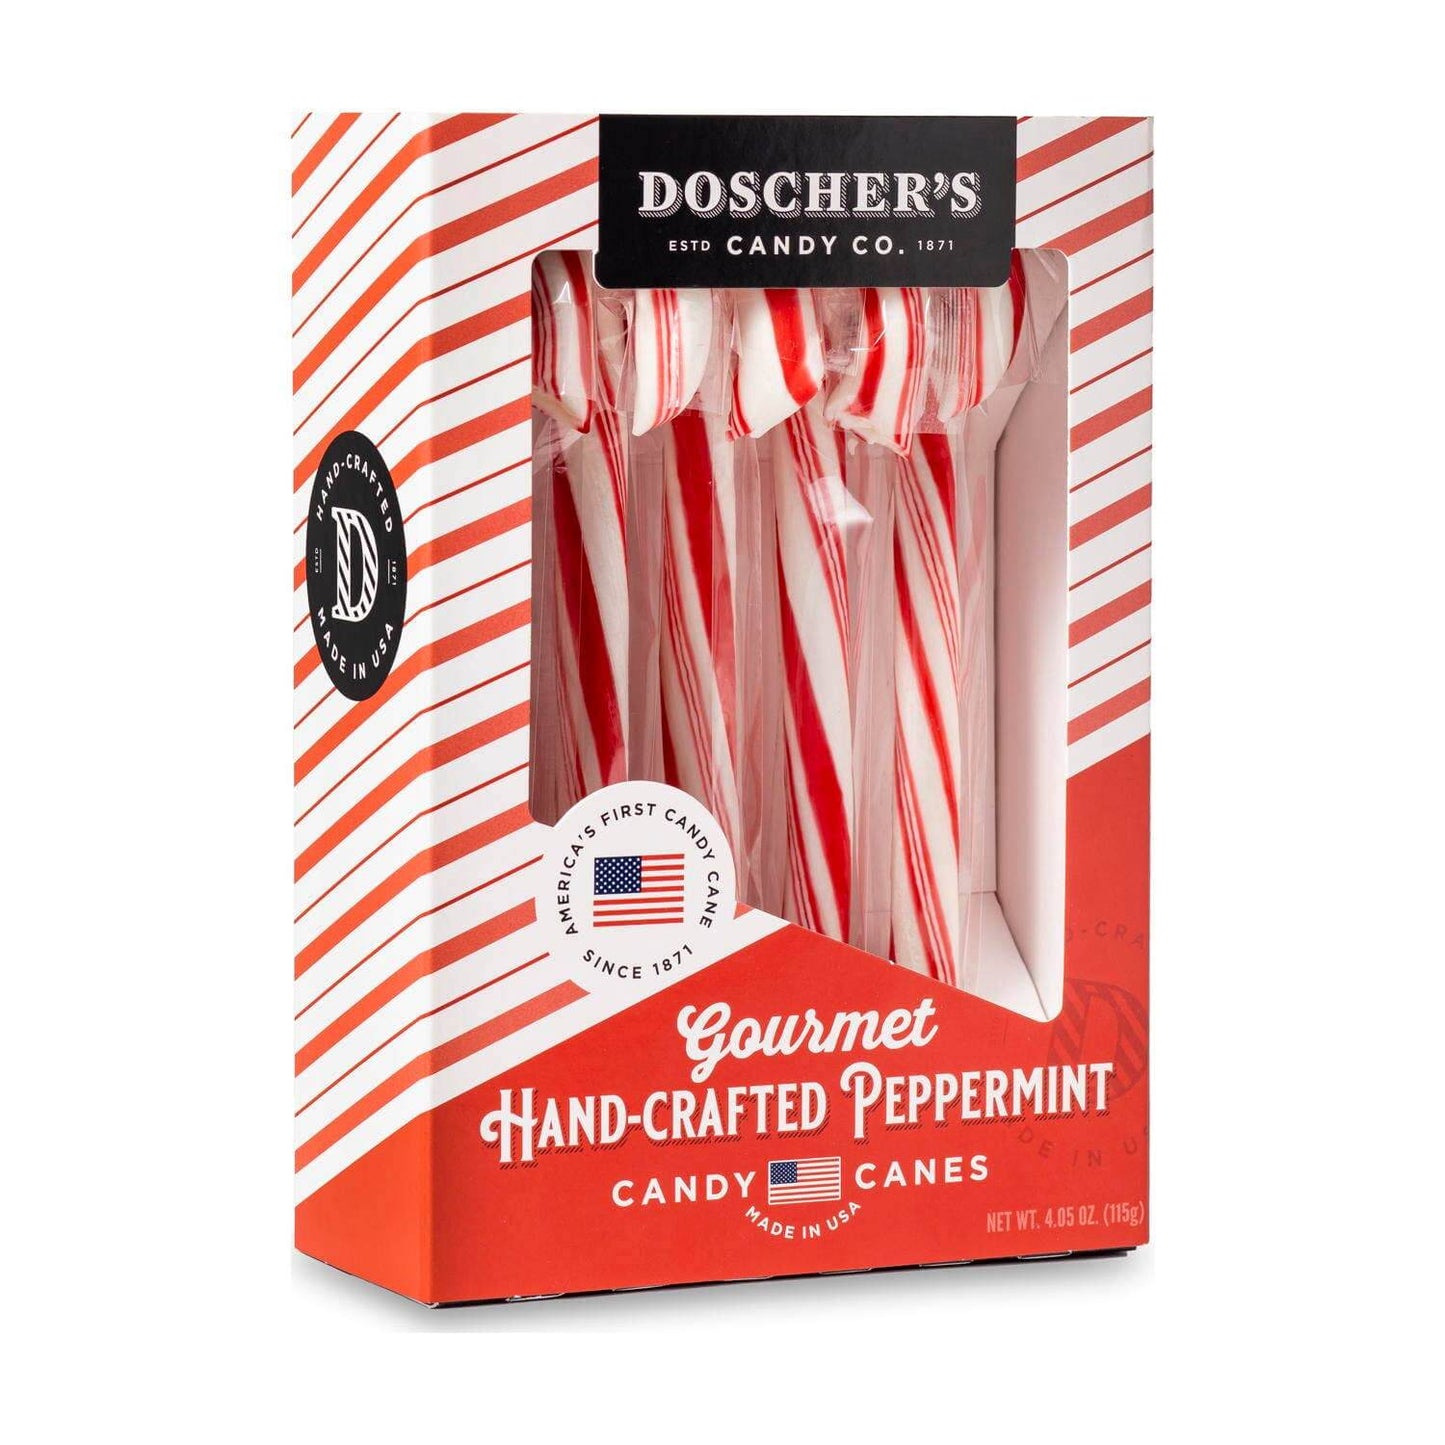 Doscher's Handcrafted Peppermint Candy Canes